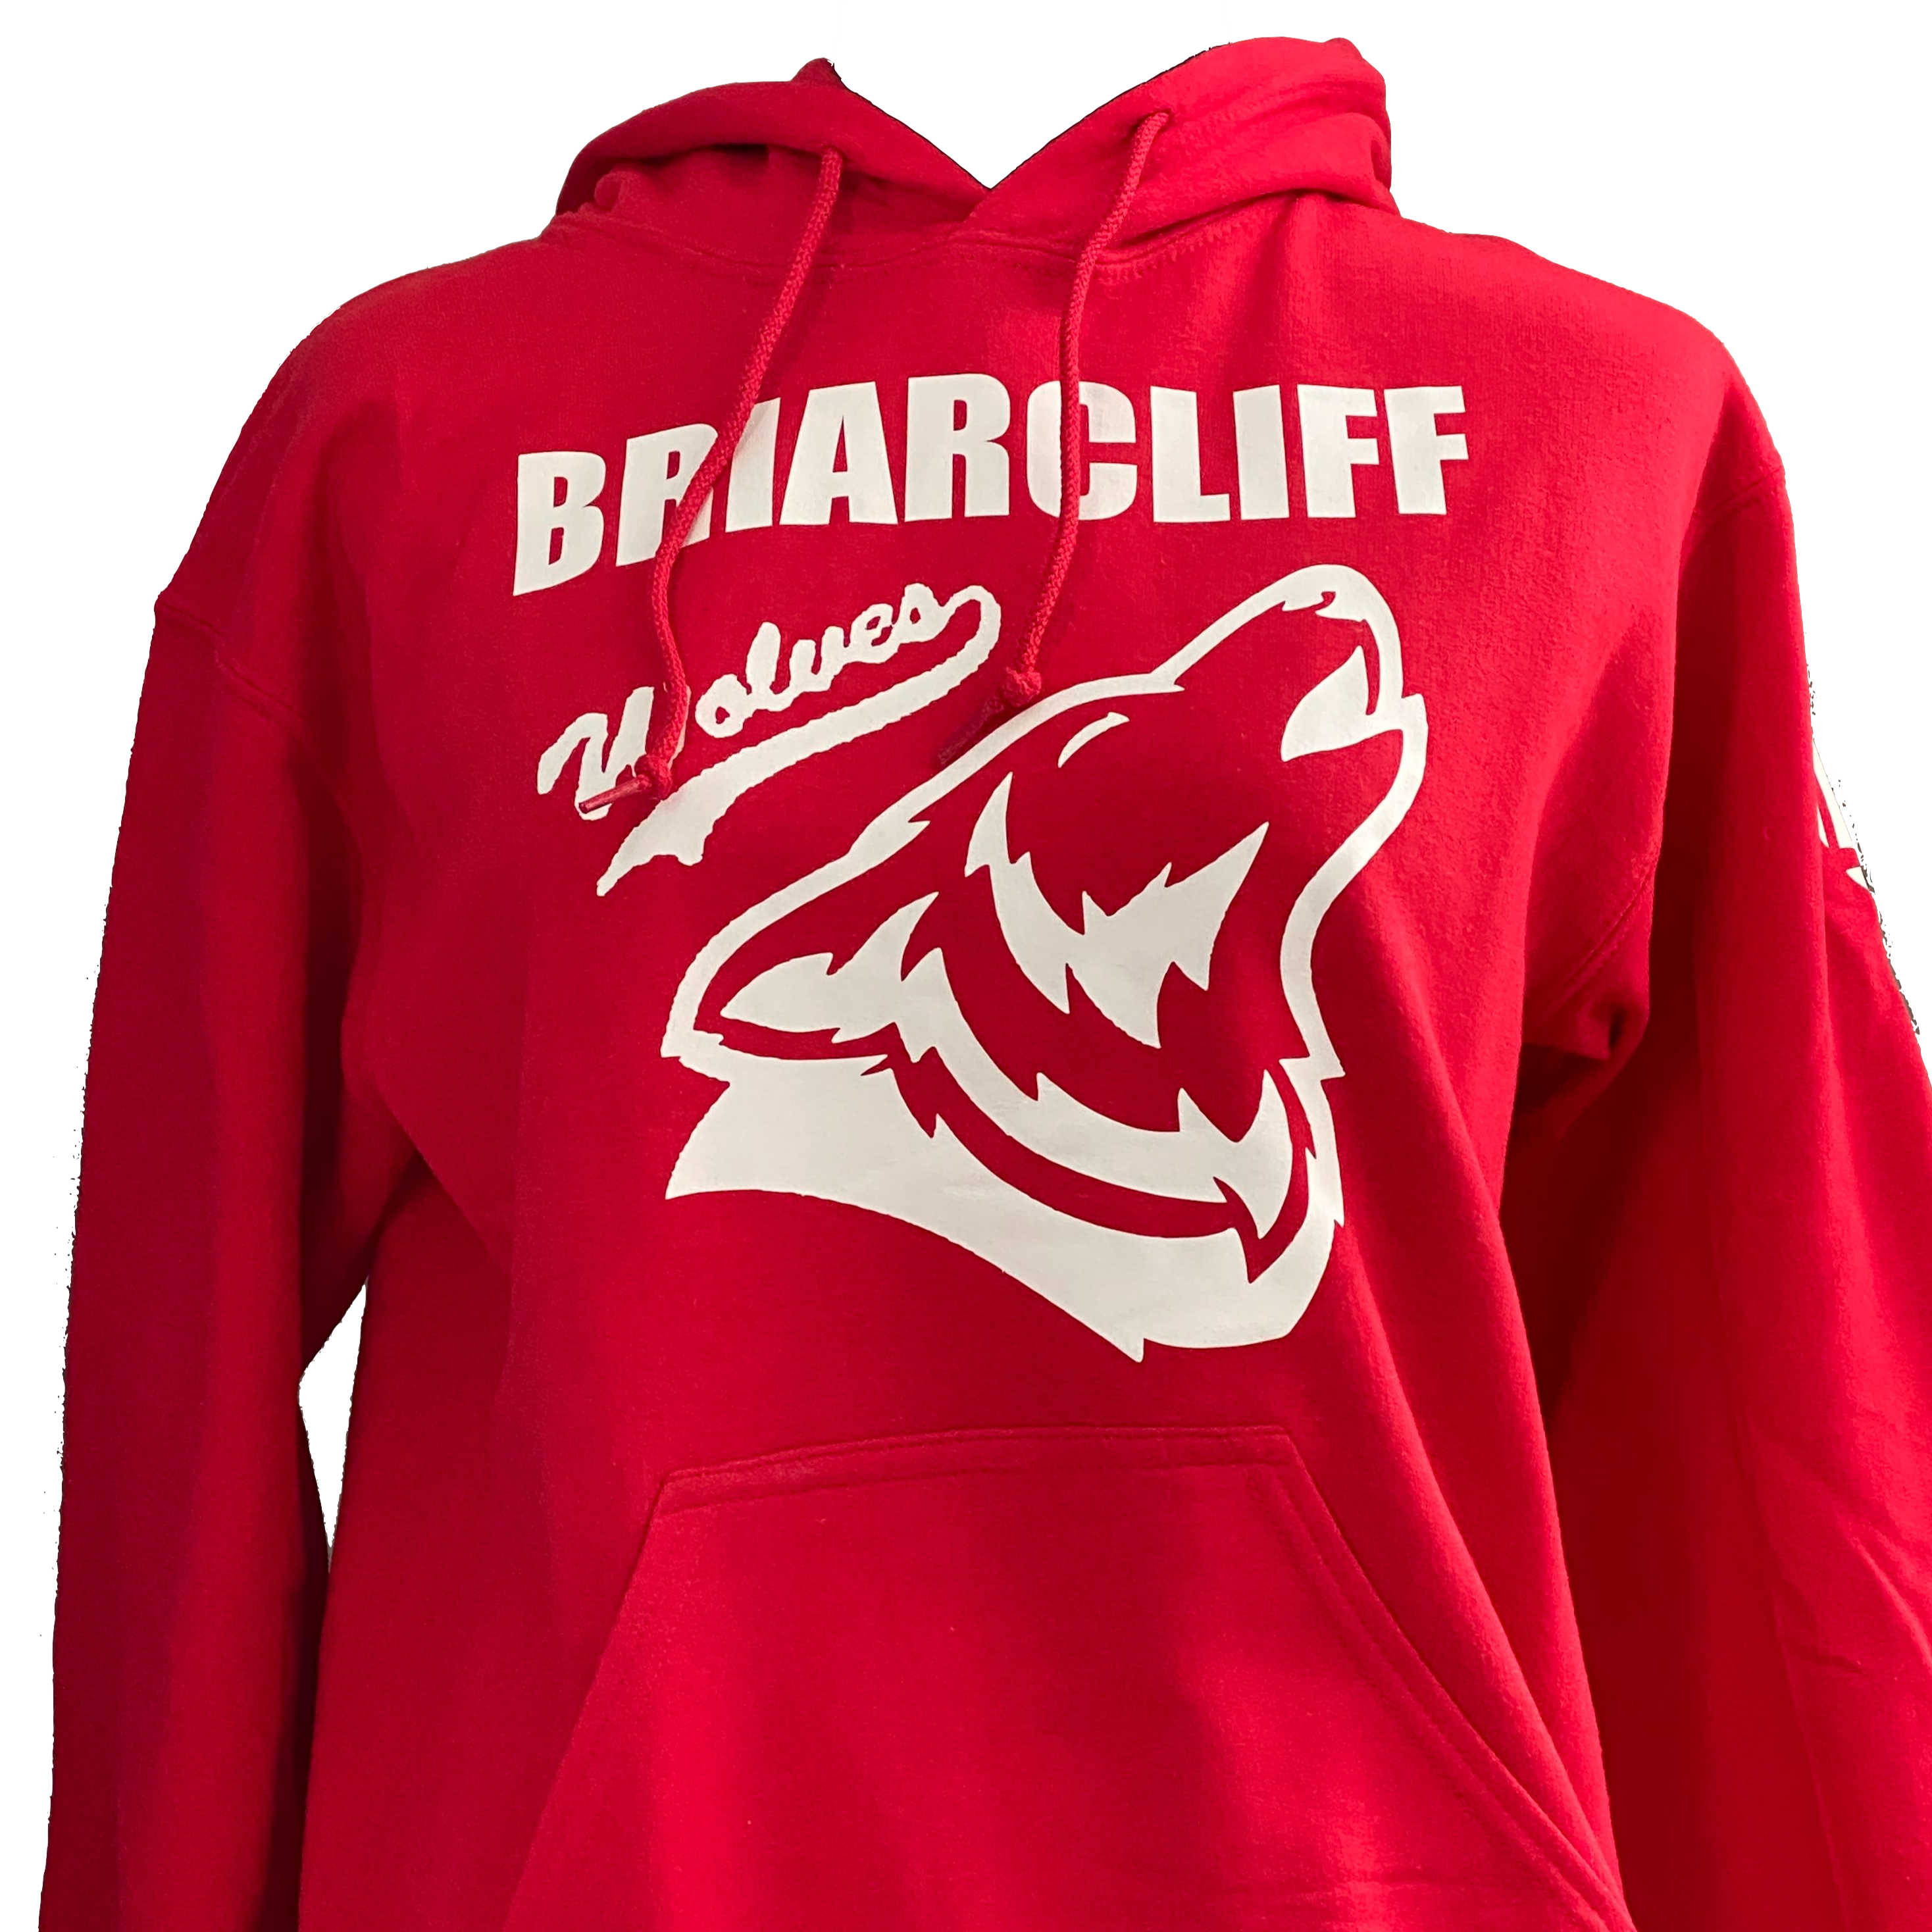 Briarcliff Wolves Red Youth Hoodie